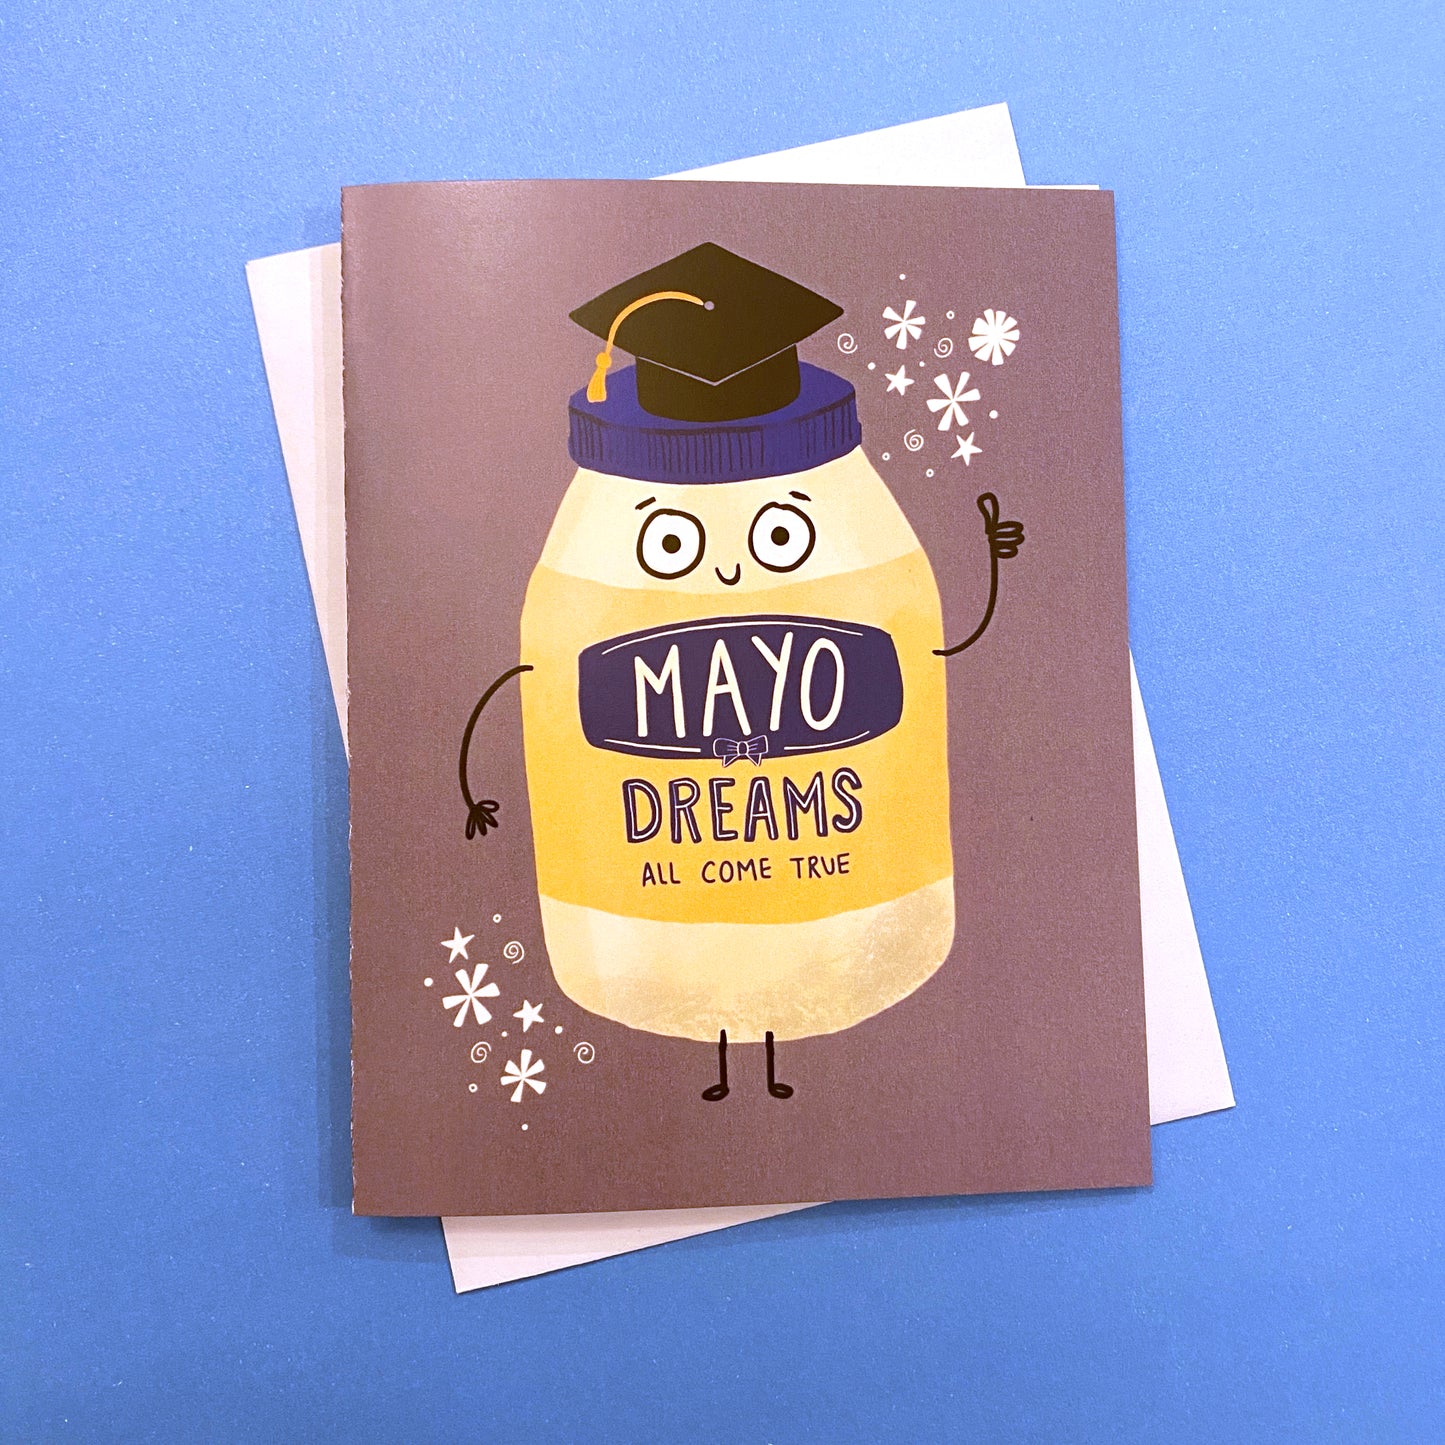 This cute mayo jar is a great way to send congrats to someone who just graduated! Size A2 greeting card (4.25" x 5.5") with envelope, blank Inside. All cards are designed and Illustrated with love by me, Anna Fox, and are printed in Denver, CO.